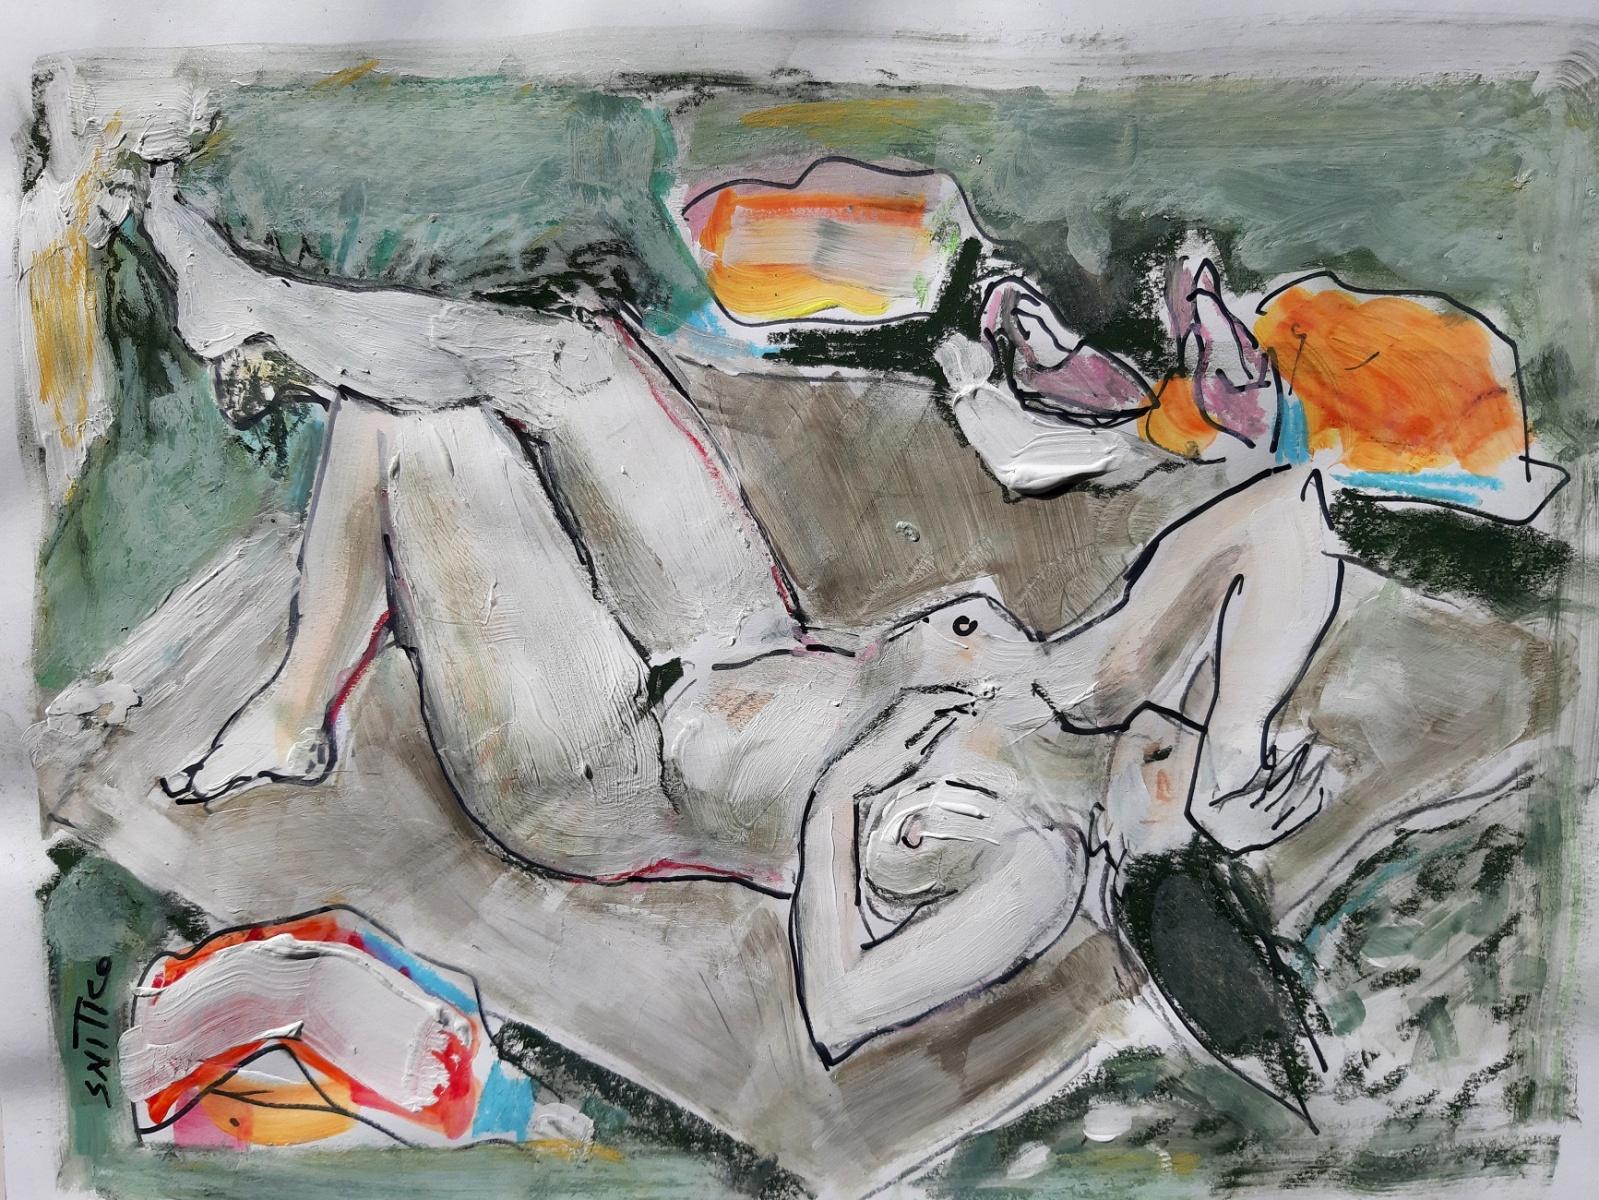 Nude - XXI century, Figurative nude drawing, Gouache, Mixed media - Other Art Style Art by Lidia Snitko-Pleszko